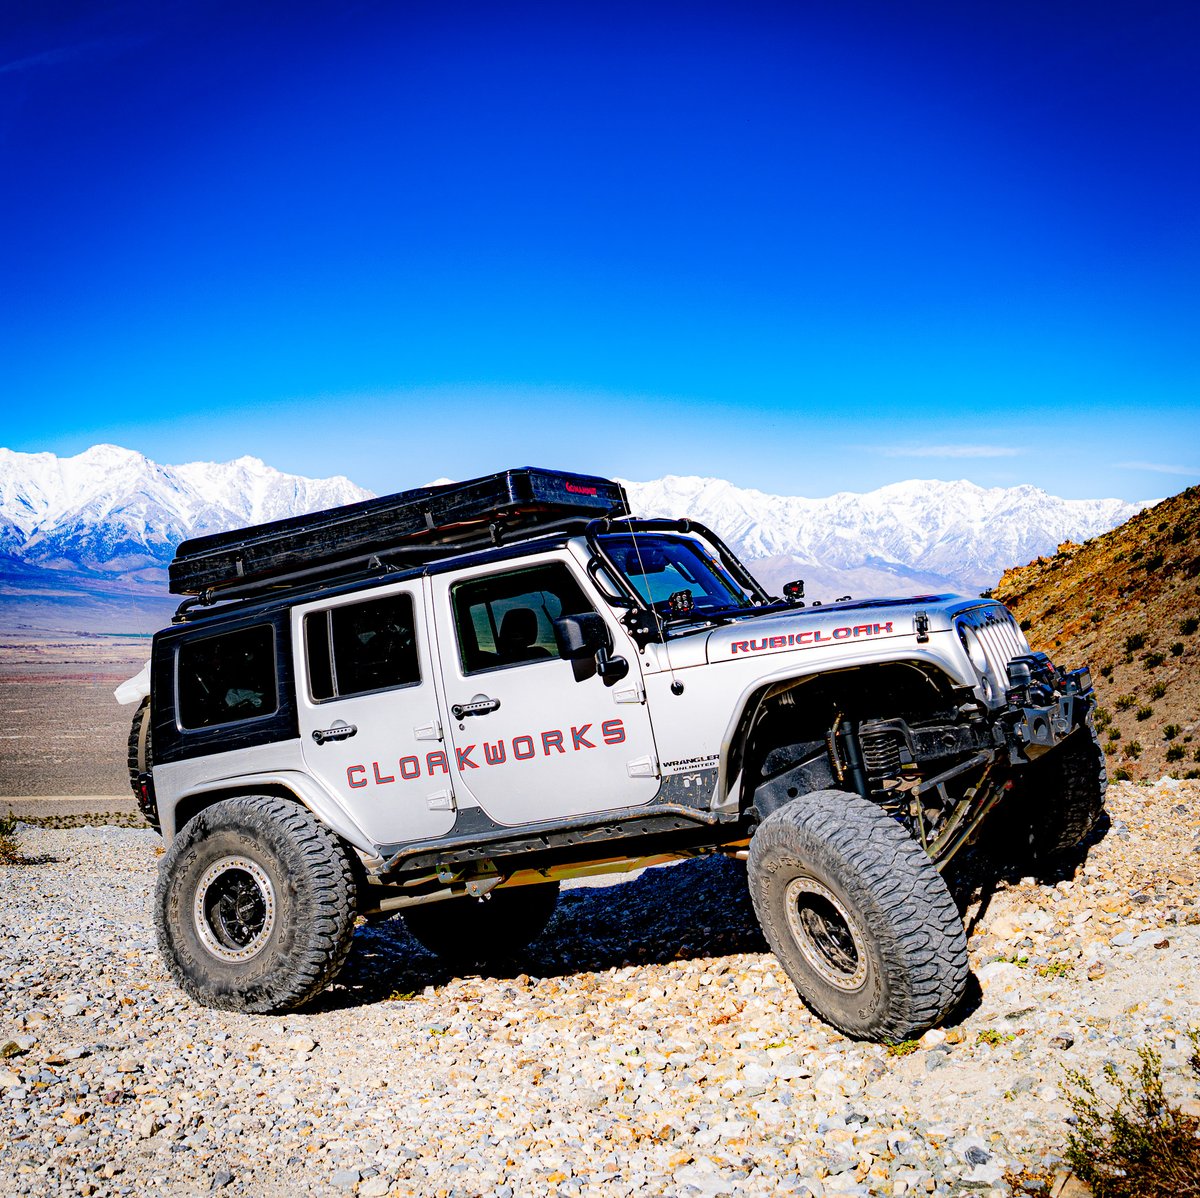 This Rocklander JK on 40's is sporting a full accoutrement of Metalcloak and ARS products, including our new Rocksport Black Shocks!   If you need repairs in Norcal, then Cloakworks 4x4 in Placerville is your place!  
Reach out to them online @ cloakworks4x4.com